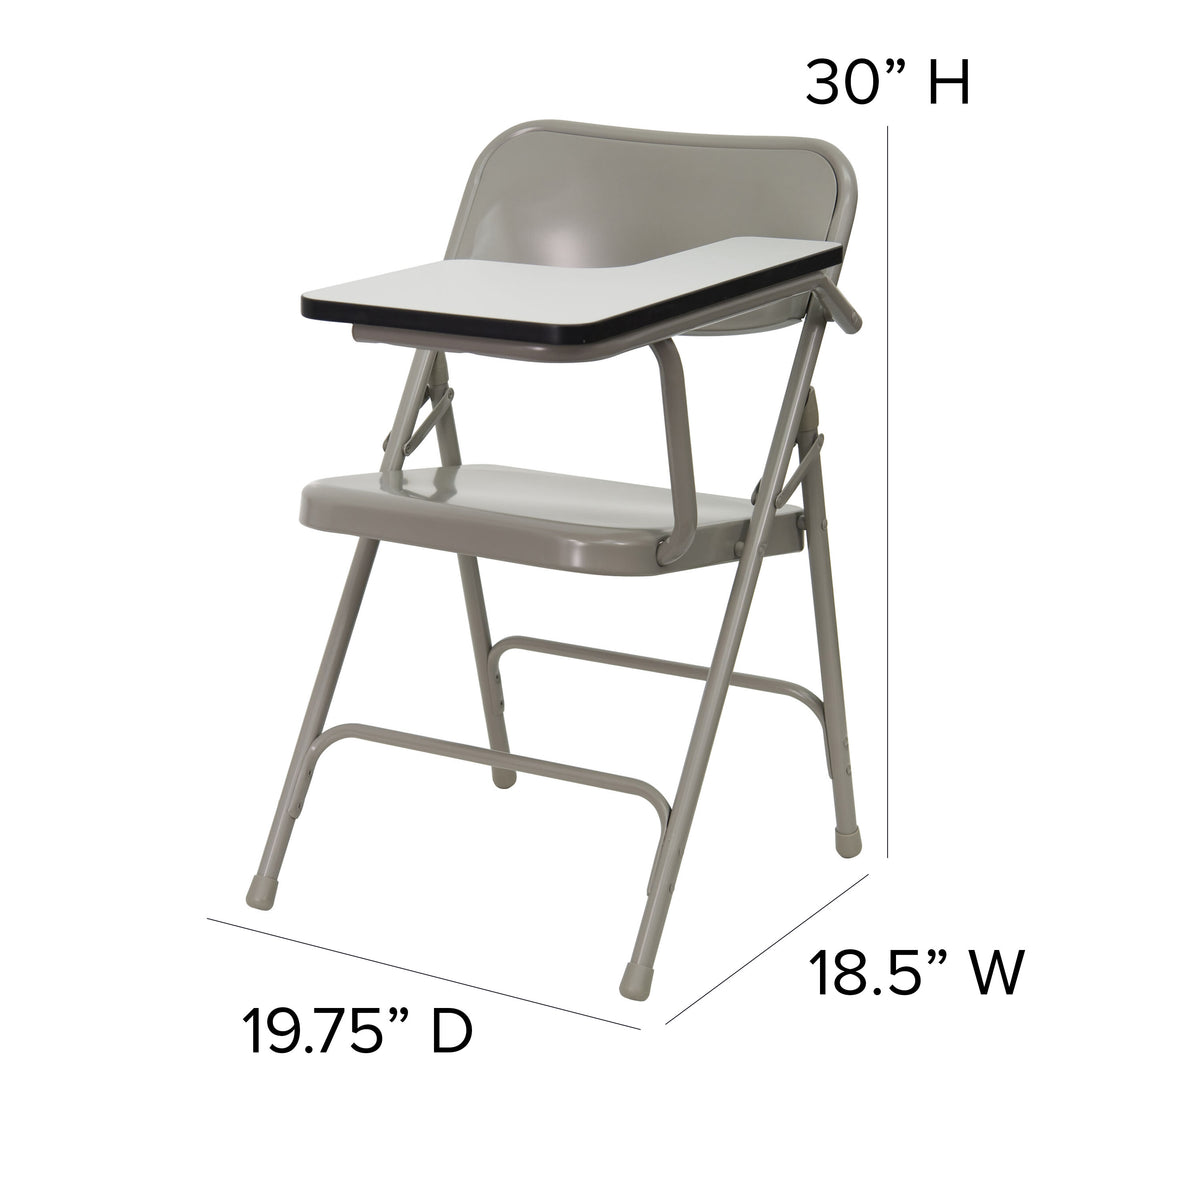 Premium Steel Beige Folding Chair with Left Handed Tablet Arm - Event Chair